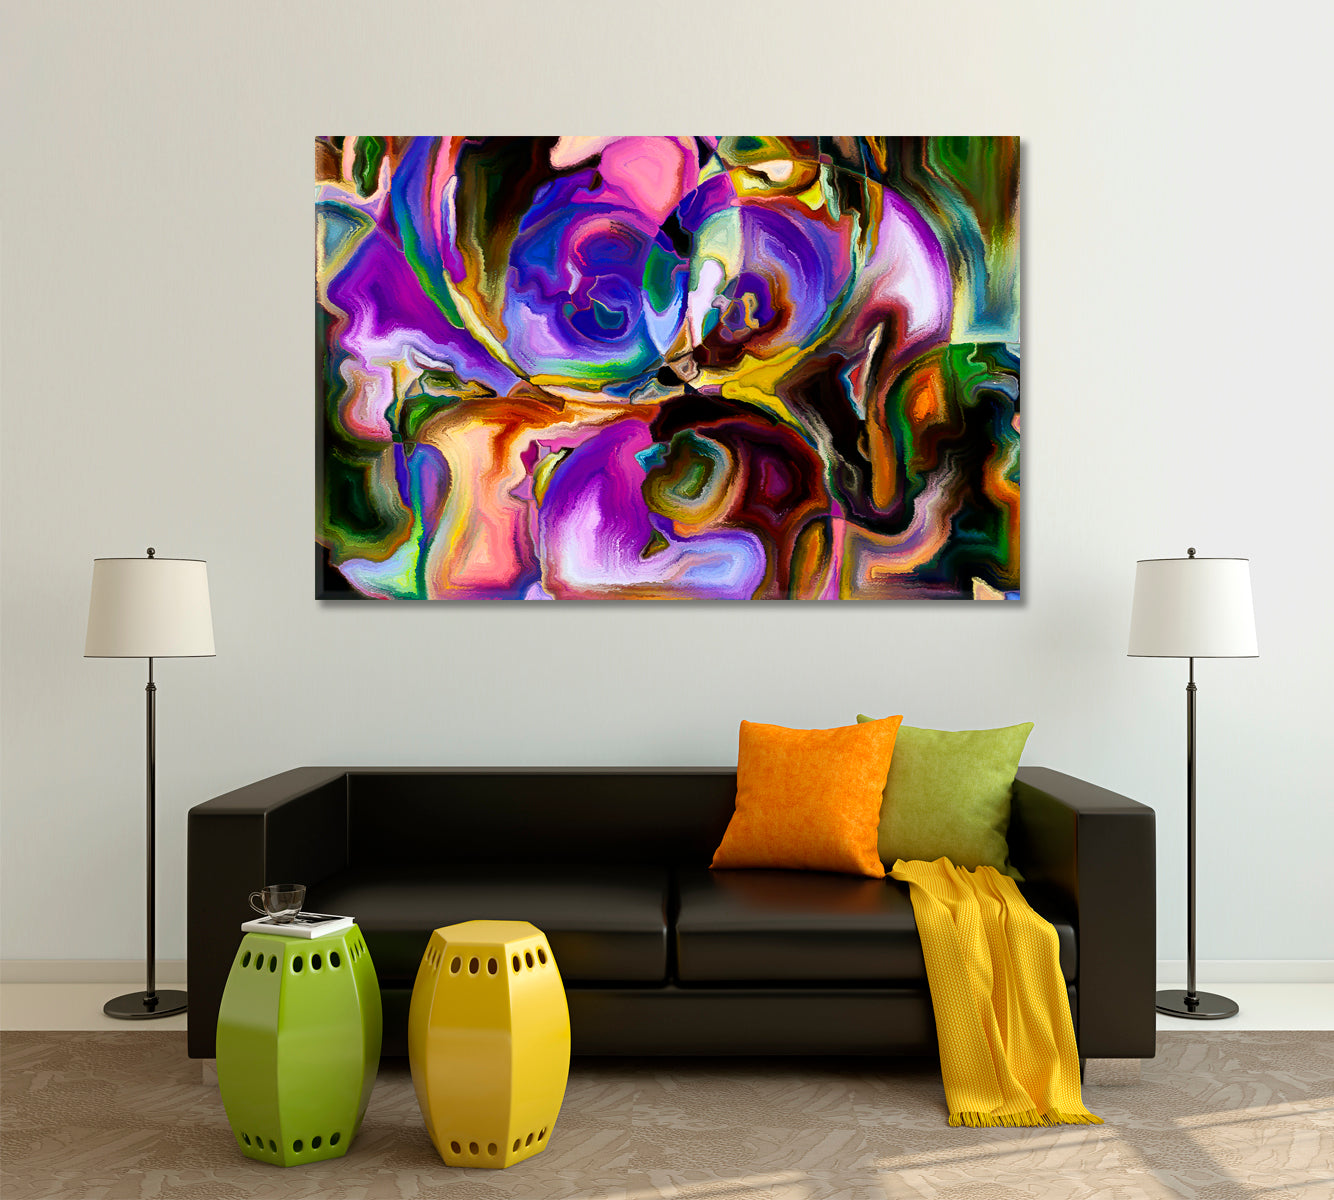 Shards of Paint Color Patterns and Shapes Abstract Art Print Artesty 1 panel 24" x 16" 